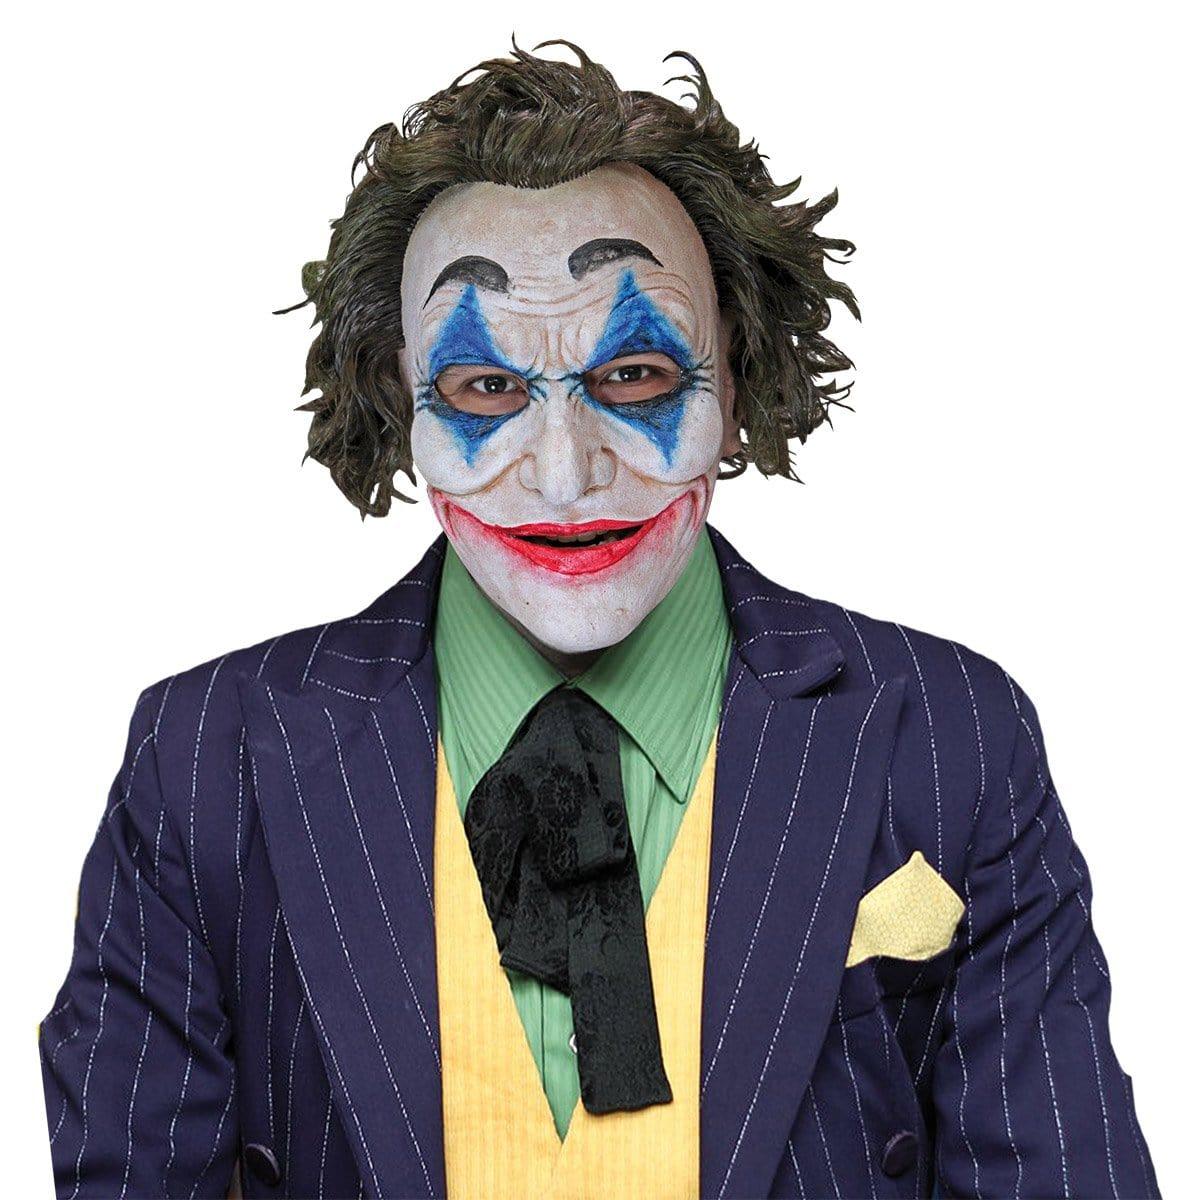 Buy Costume Accessories Crazy Jack clown mask sold at Party Expert